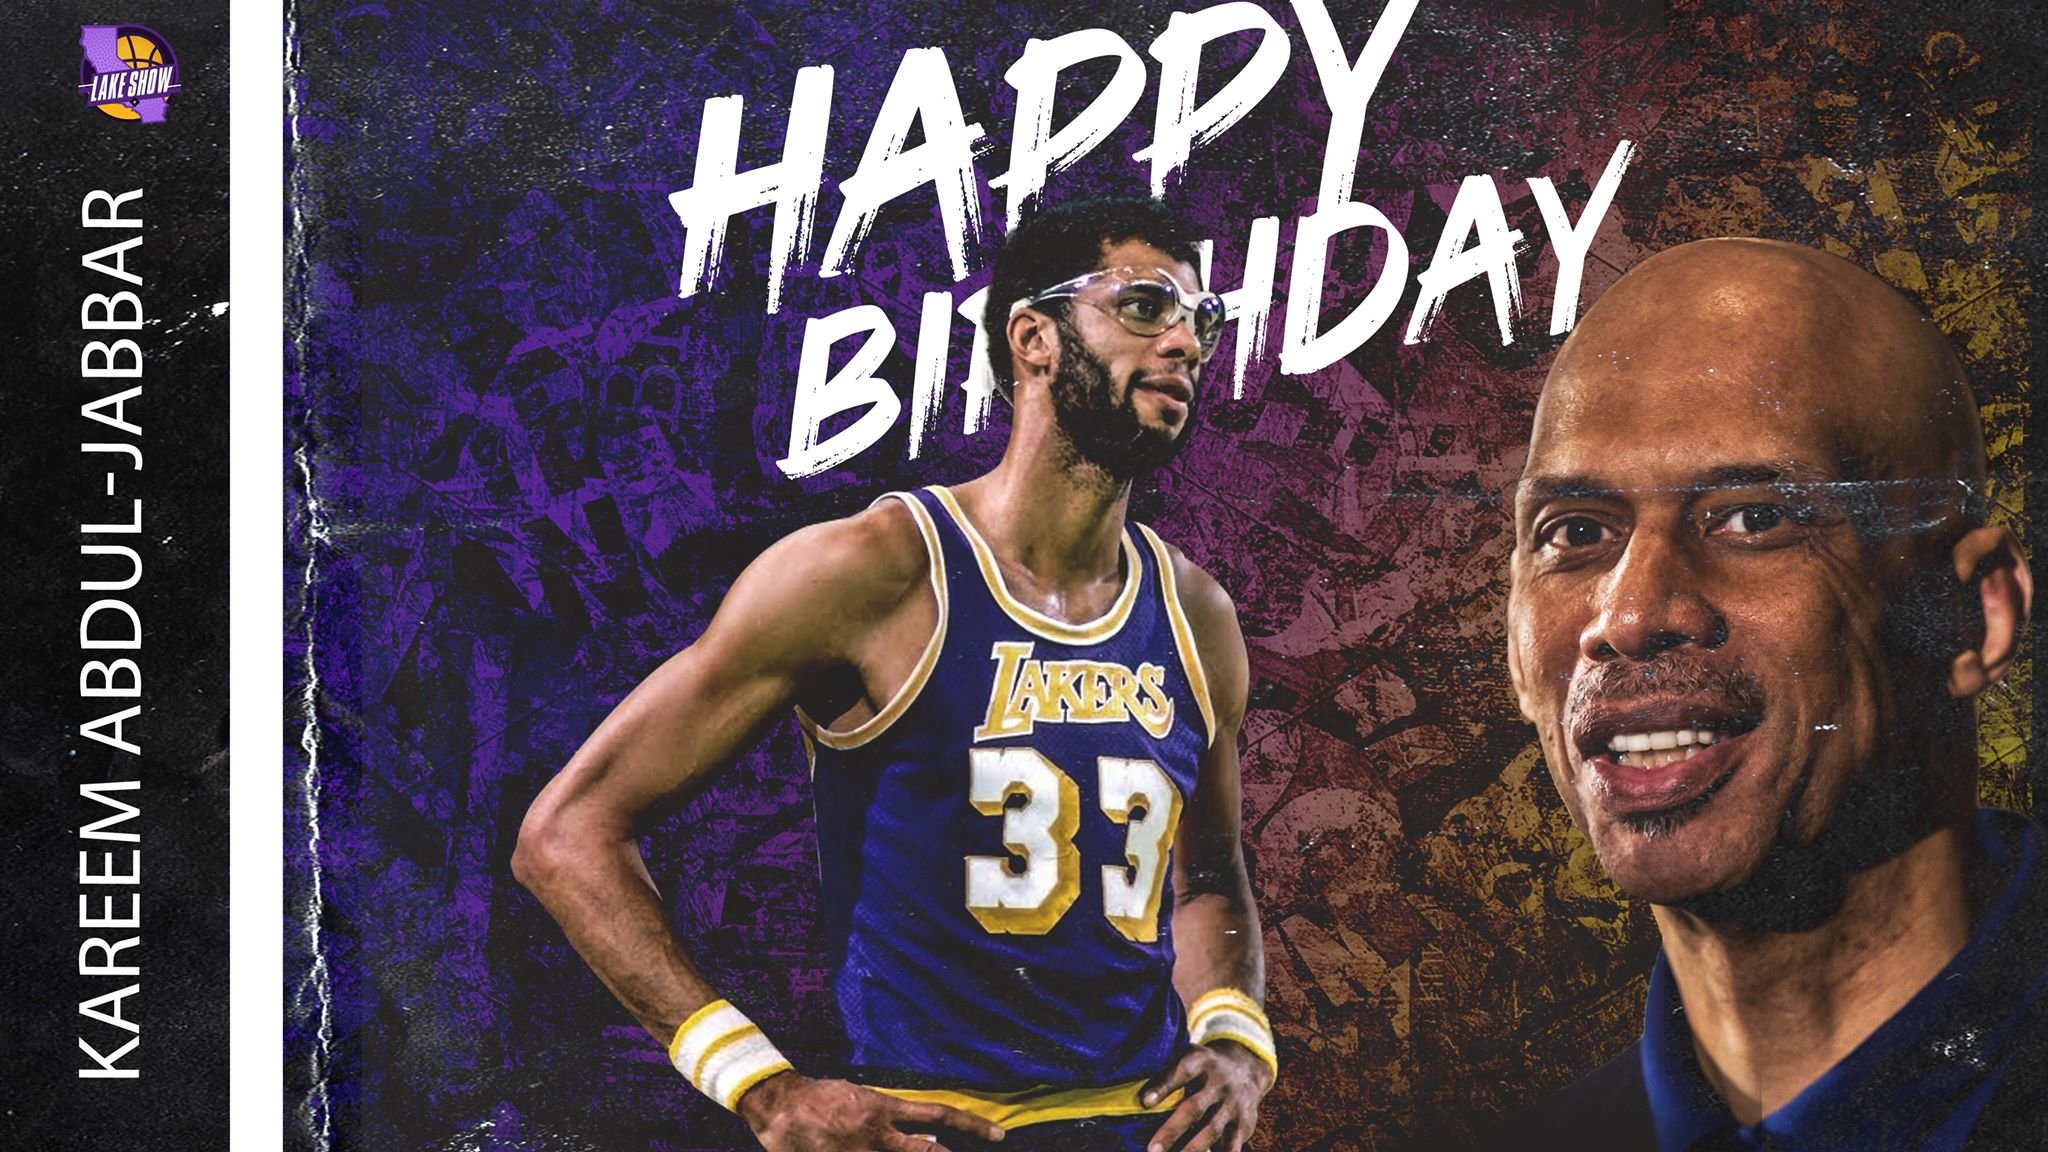 Happy Birthday
KAREEM ABDUL JABBAR
WON ON ALL LEVELS
GREATEST OF ALL-TIME
to many
73 years young! 